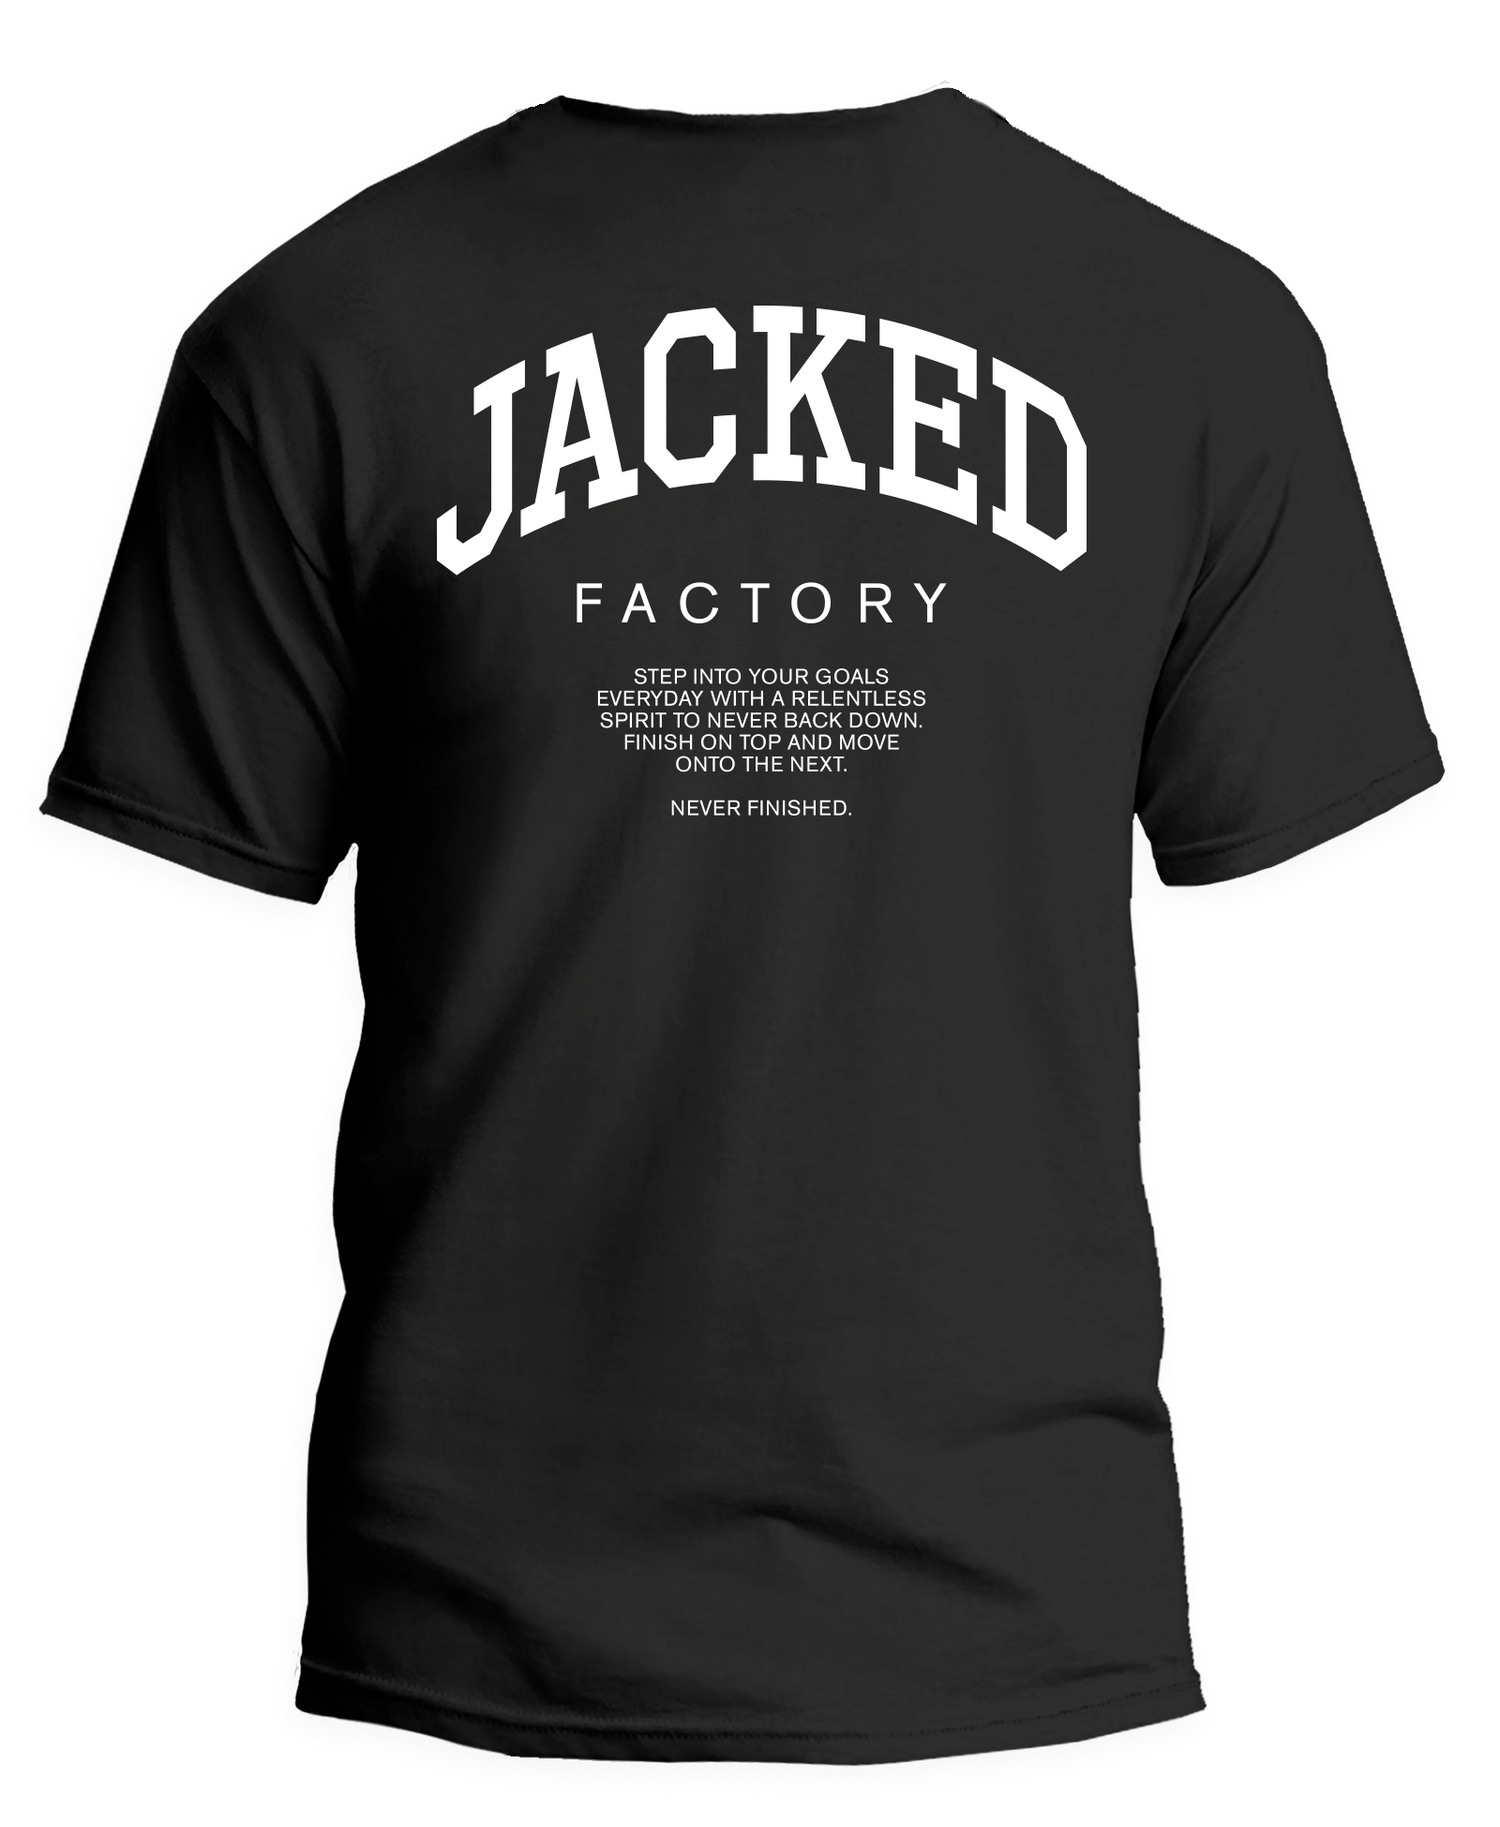 Back of Jacked Factory's limited edition black graphic tee with motivational text